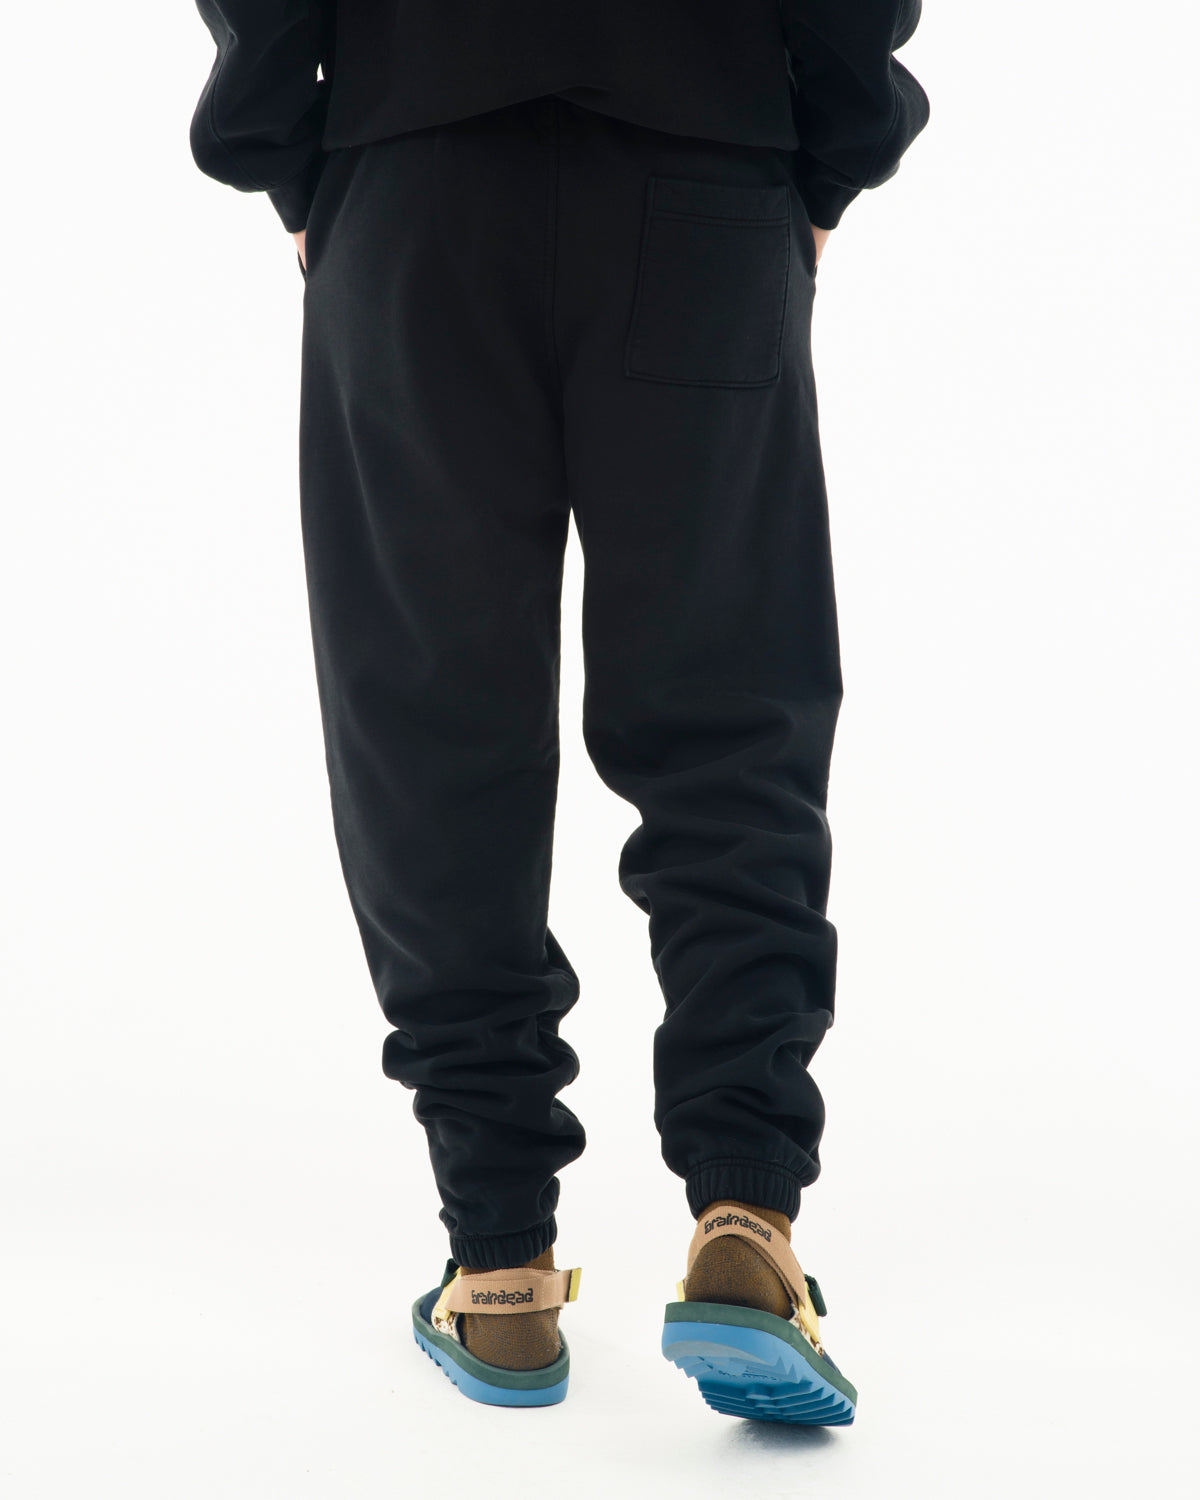 Heavyweight Embroidered Sweatpants - Black 7